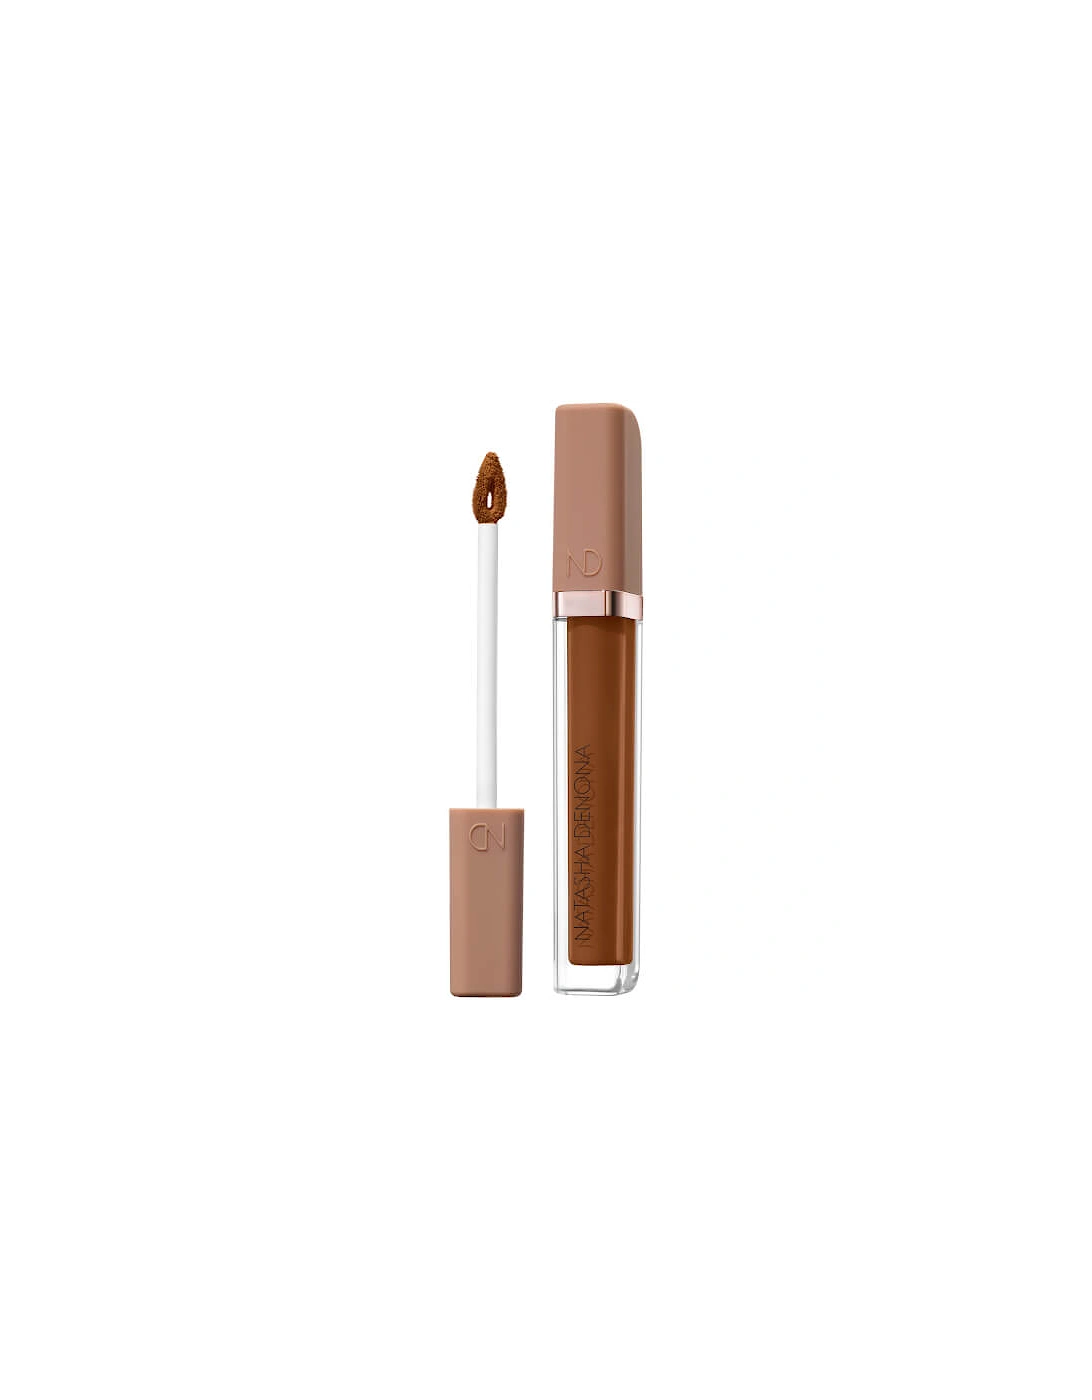 Hy-Glam Concealer - NP14, 2 of 1